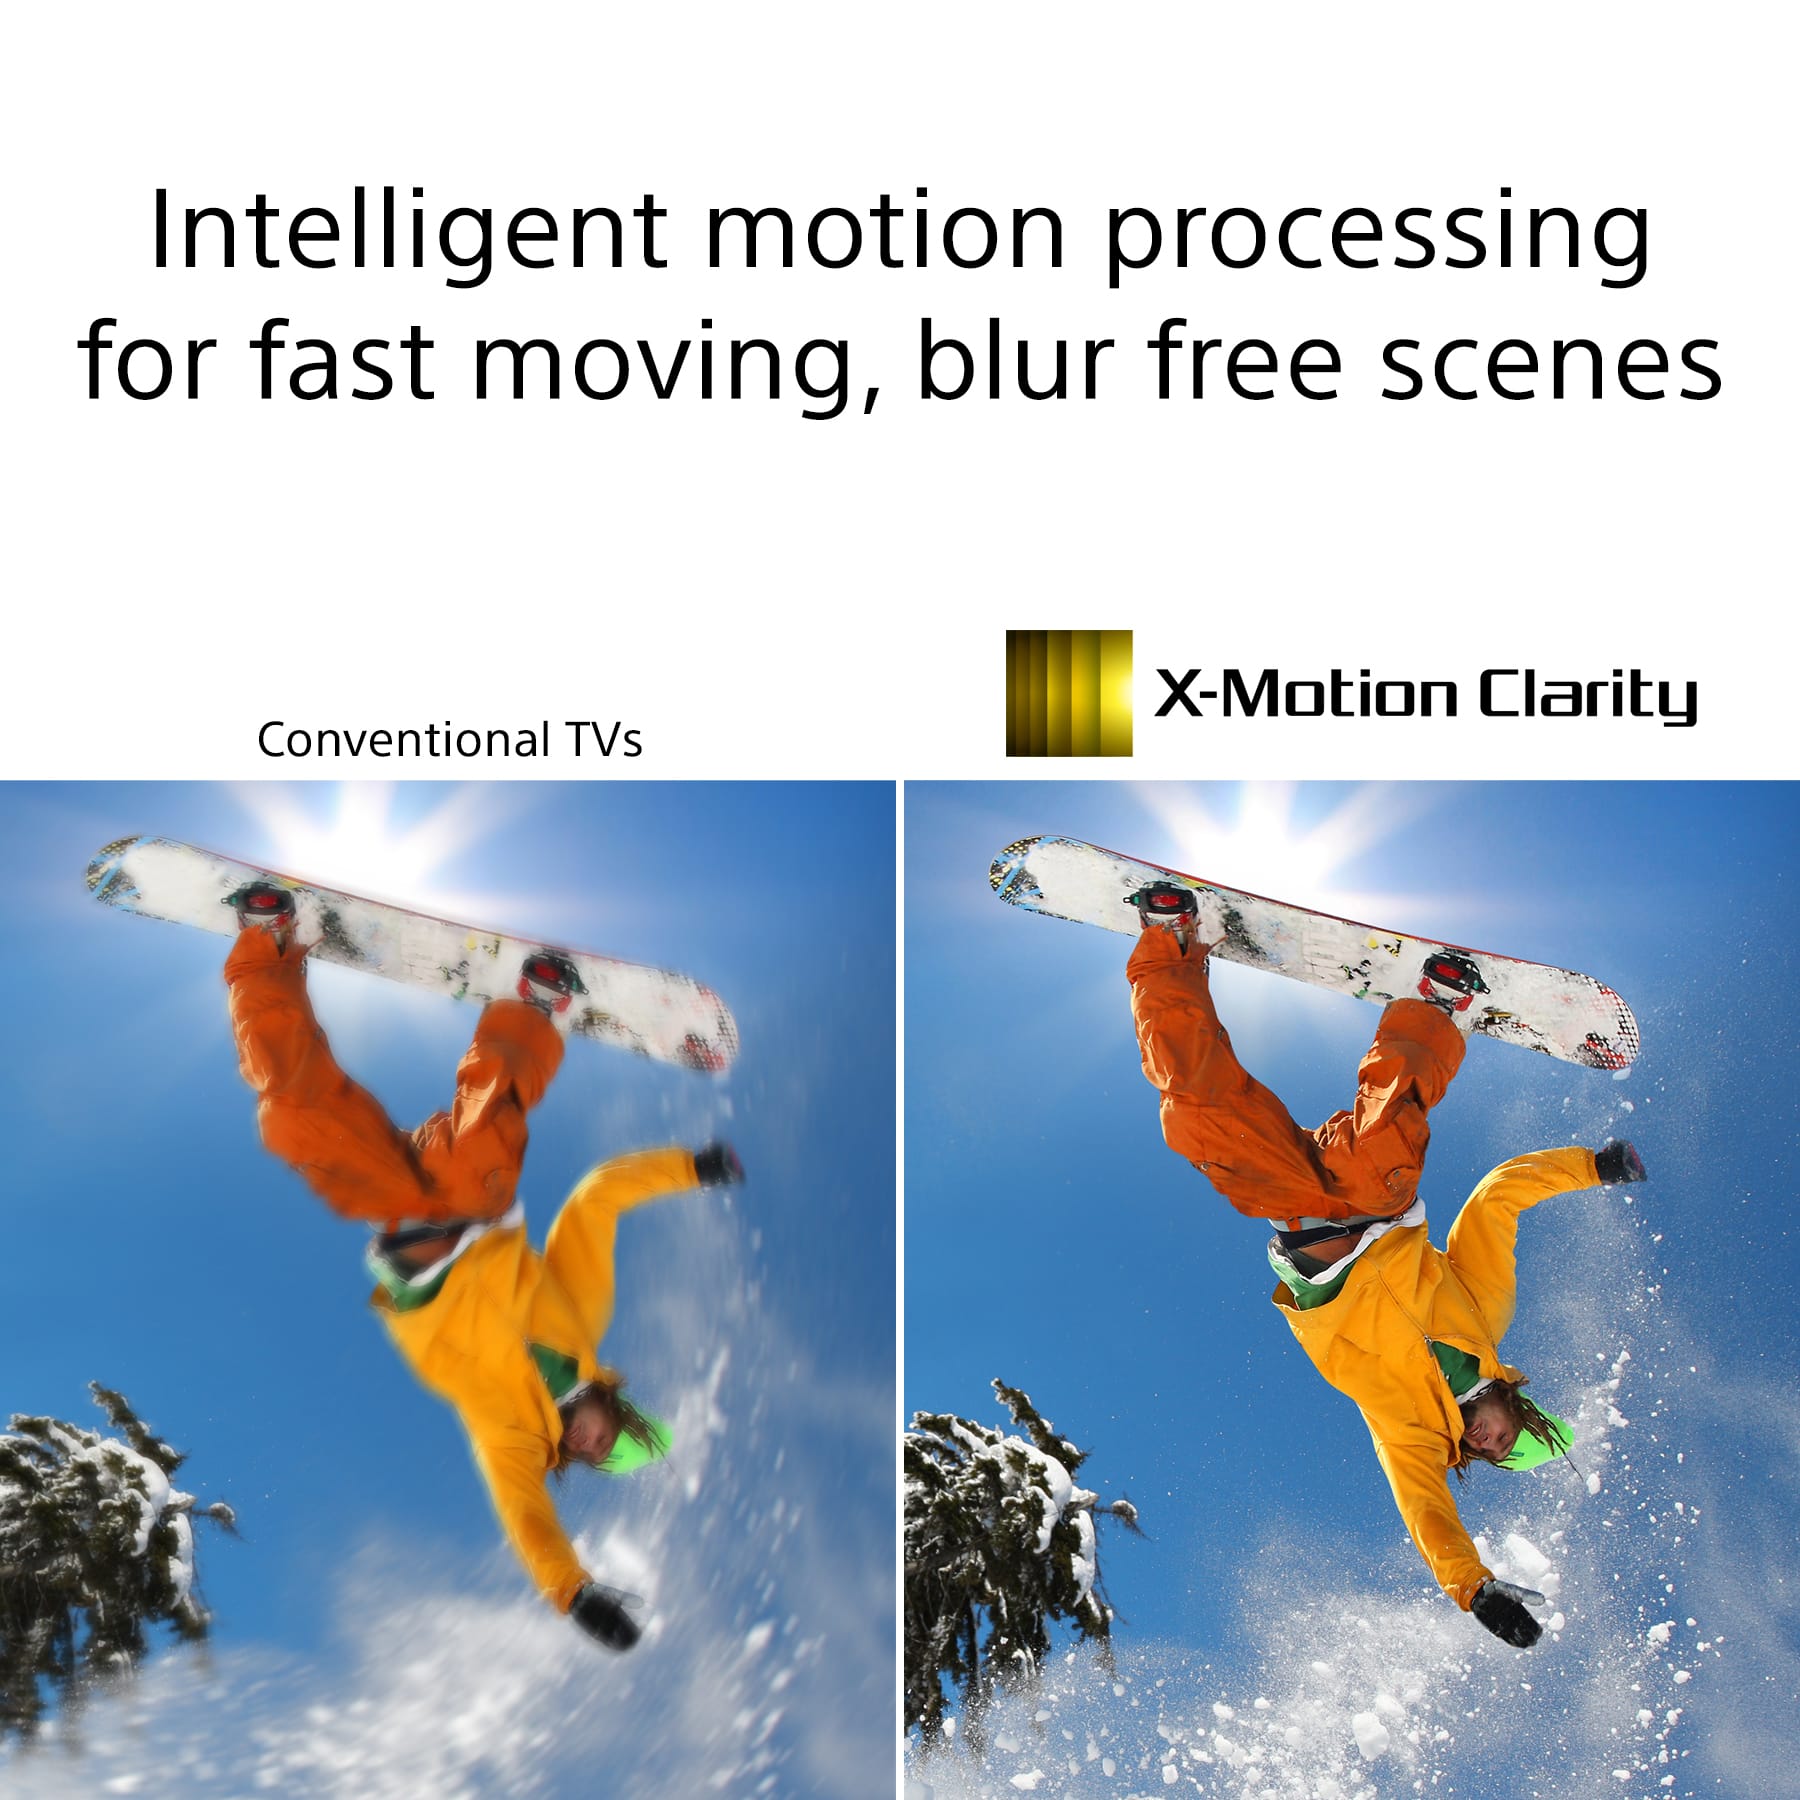 X-Motion Clarity